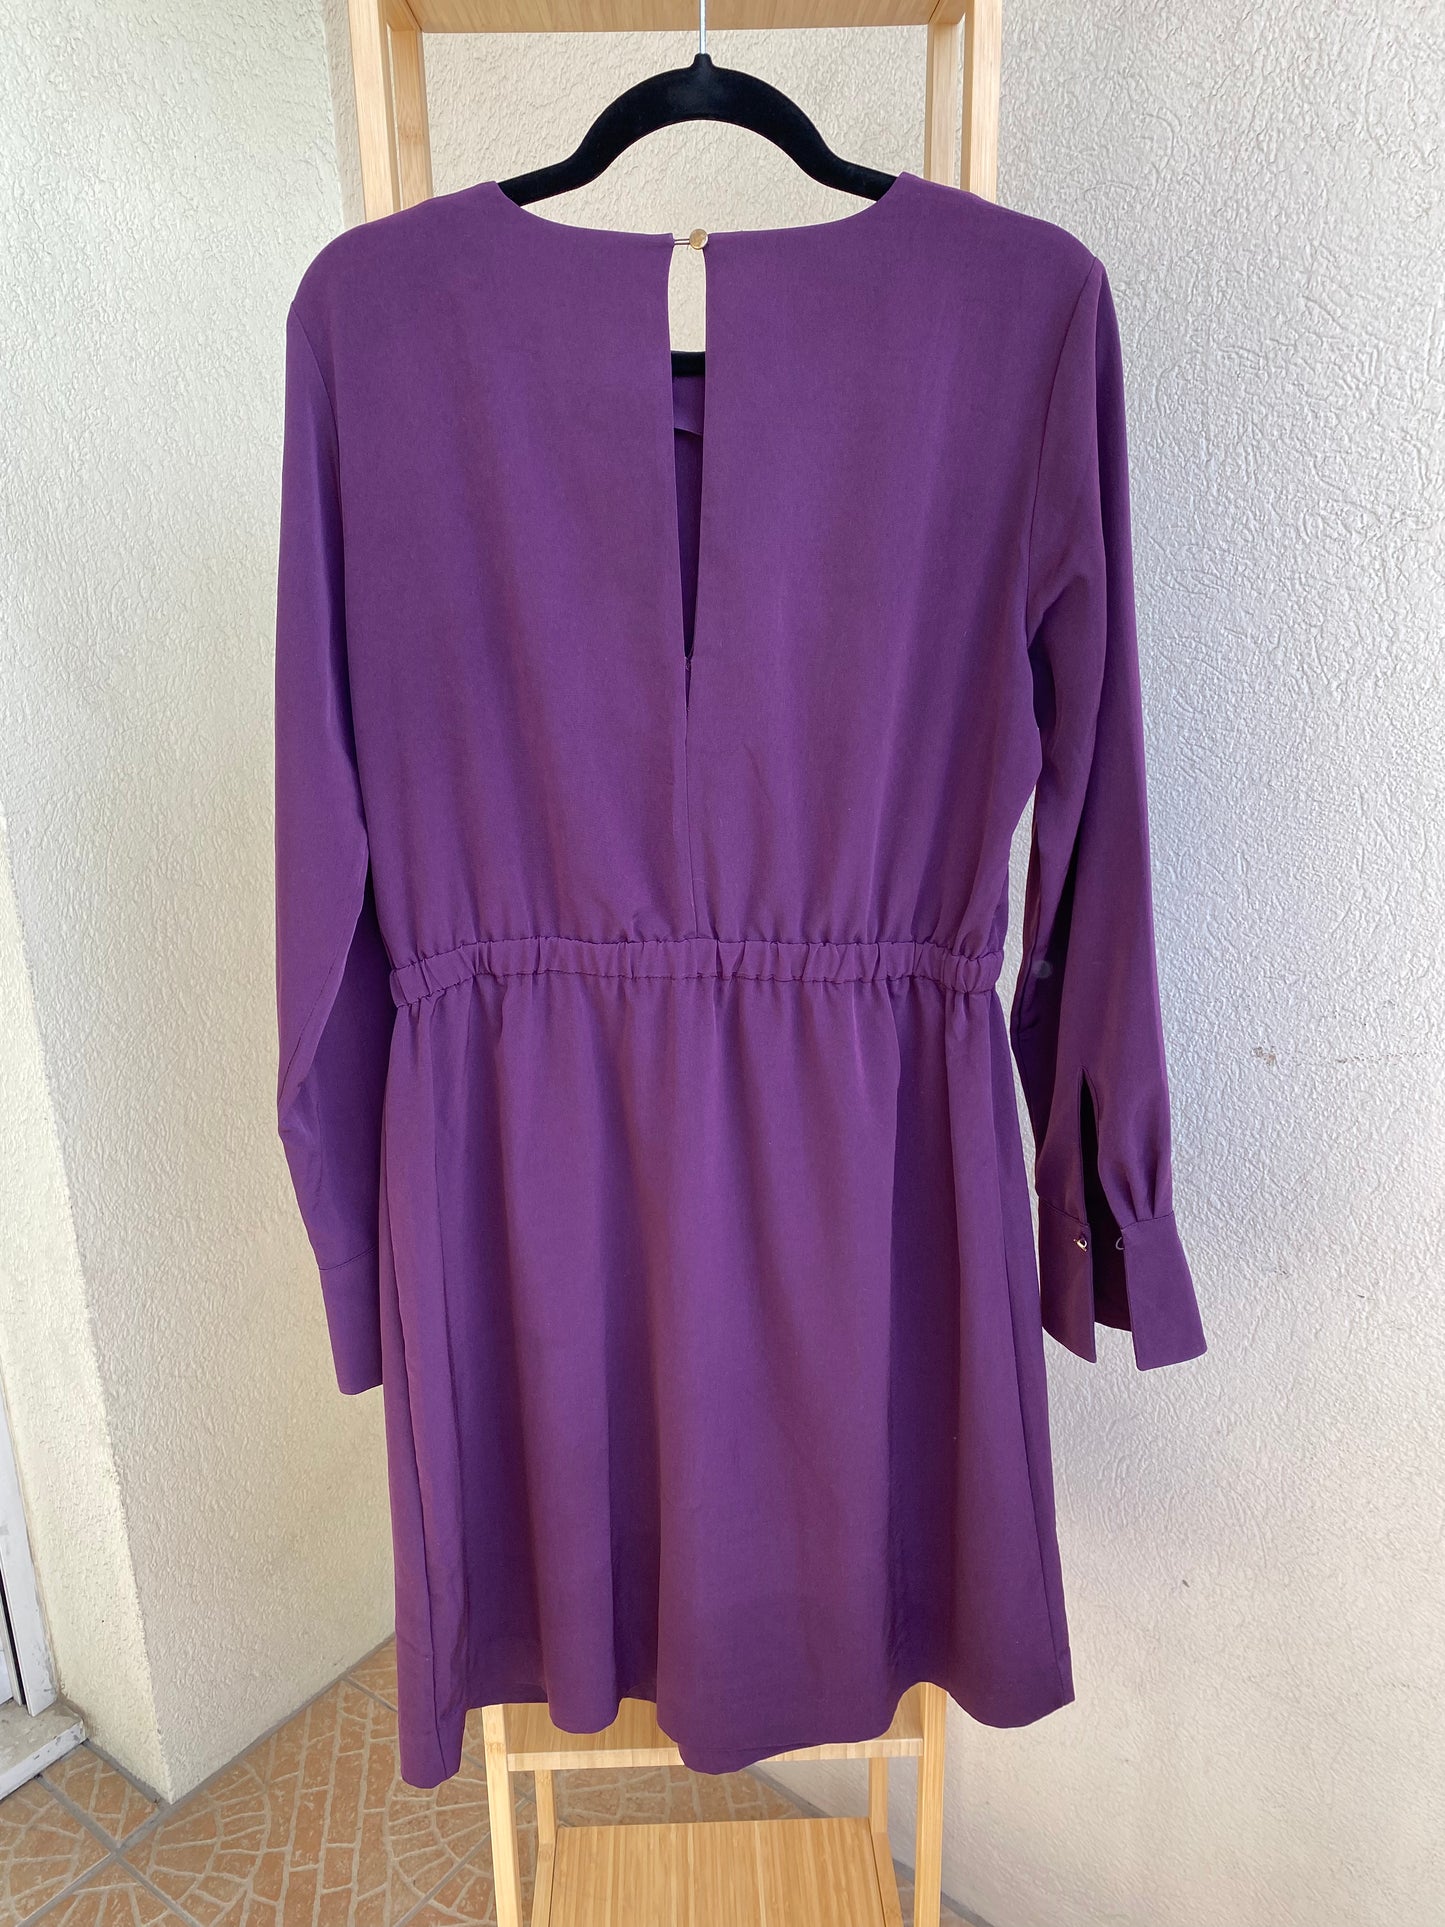 Robe H&M prune chic Taille 40/42